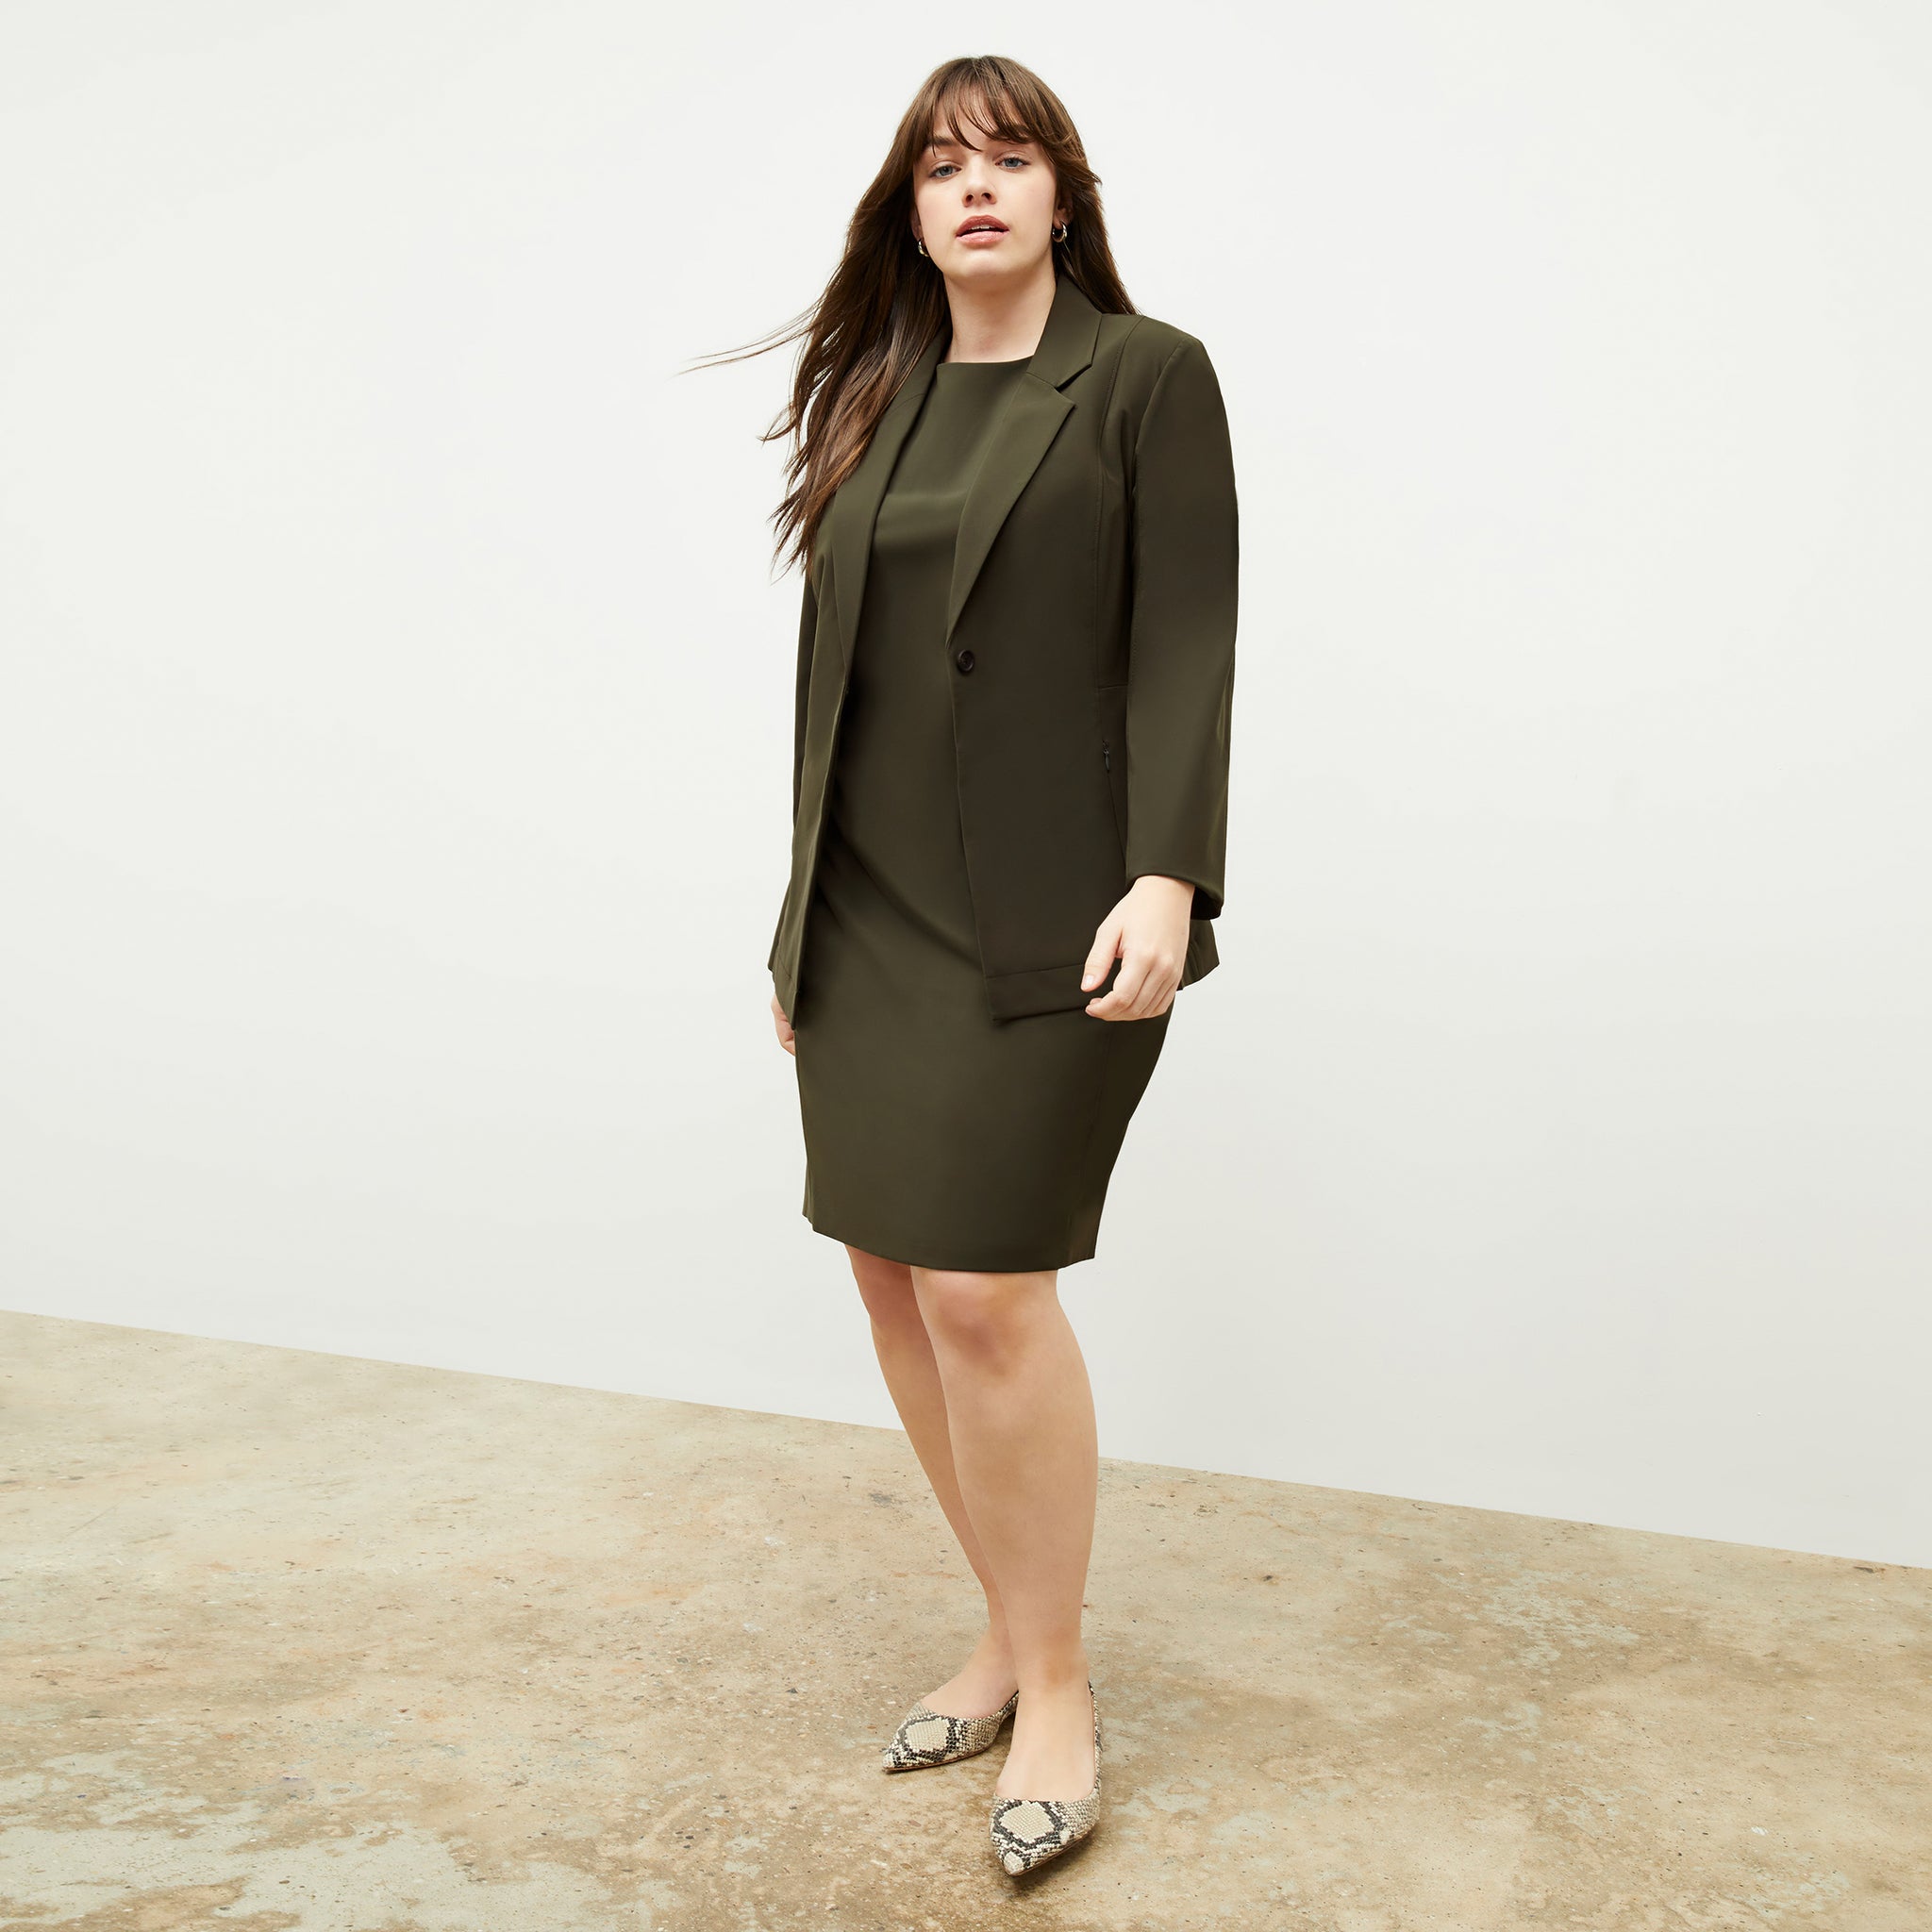 Front image of a woman standing wearing the Moreland jacket in olive